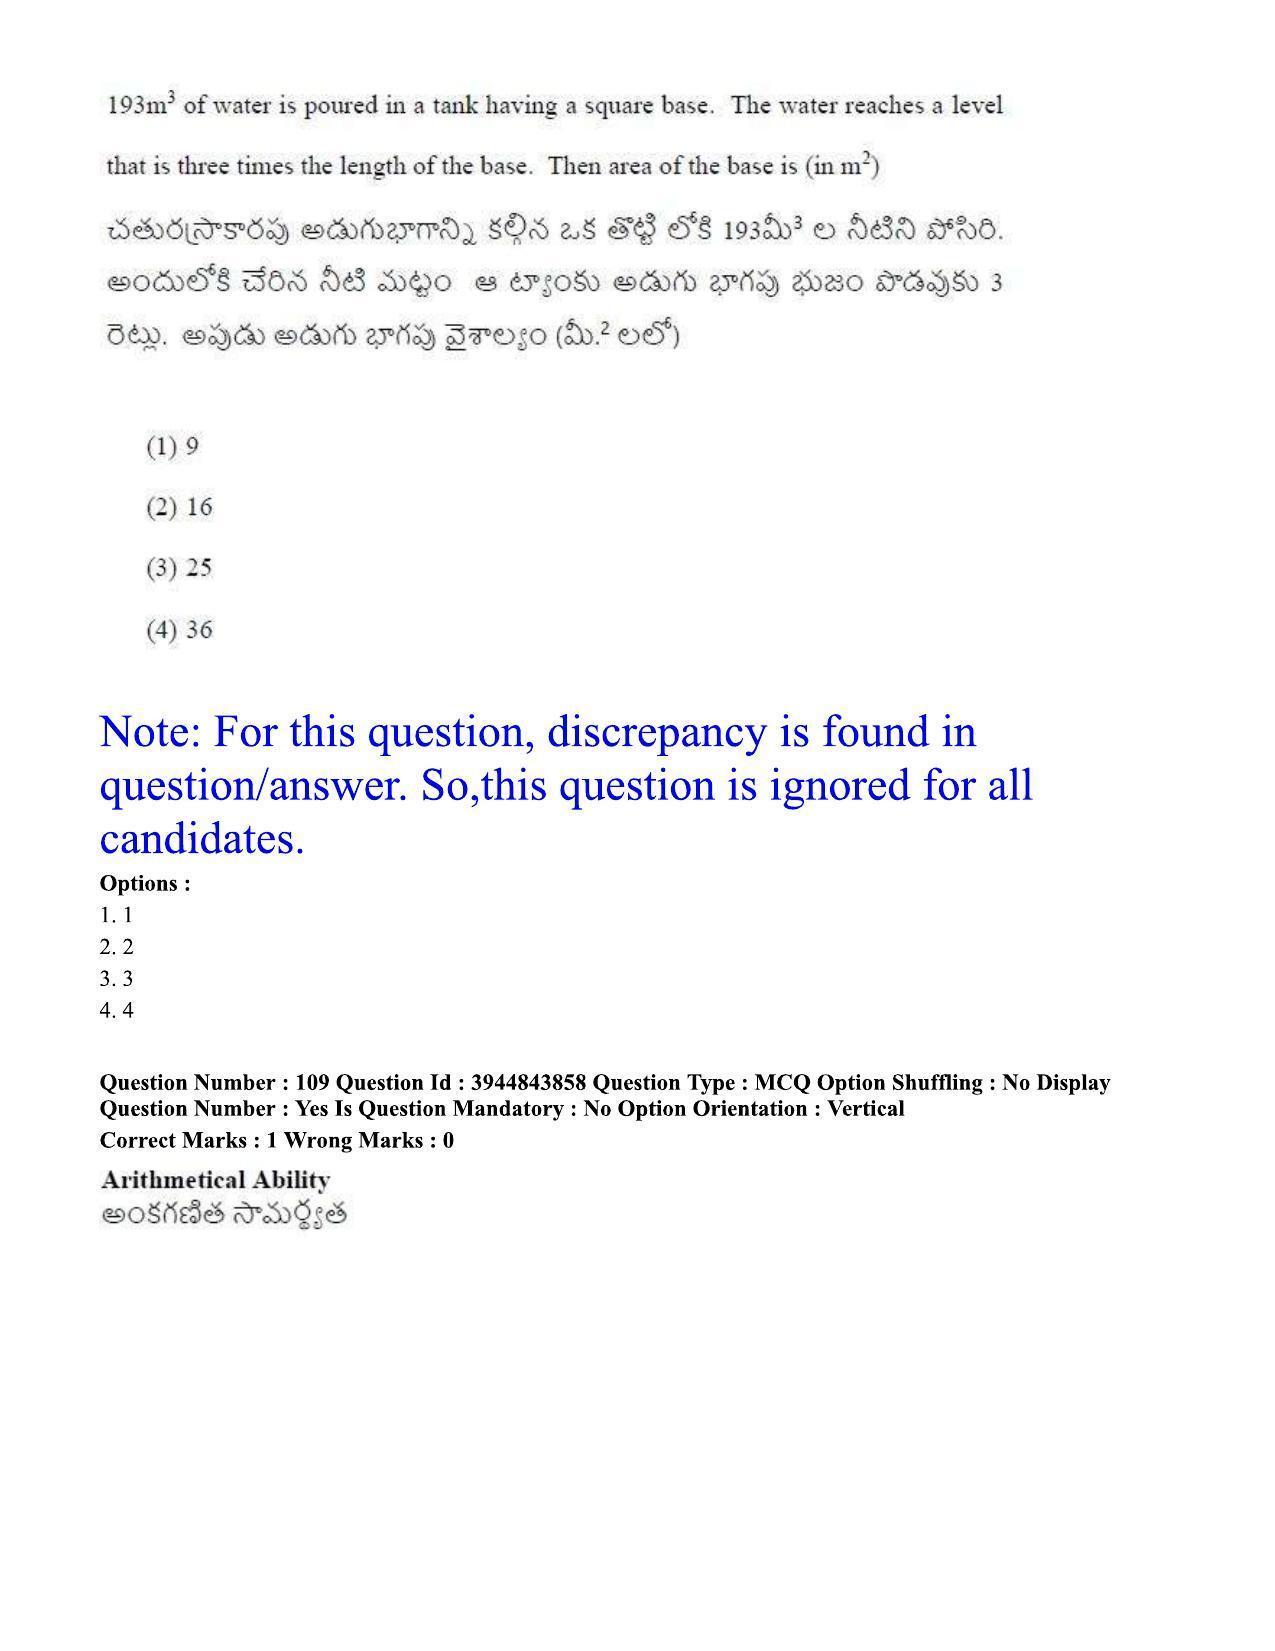 TS ICET 2020 Question Paper 1 - Oct 1, 2020	 - Page 85